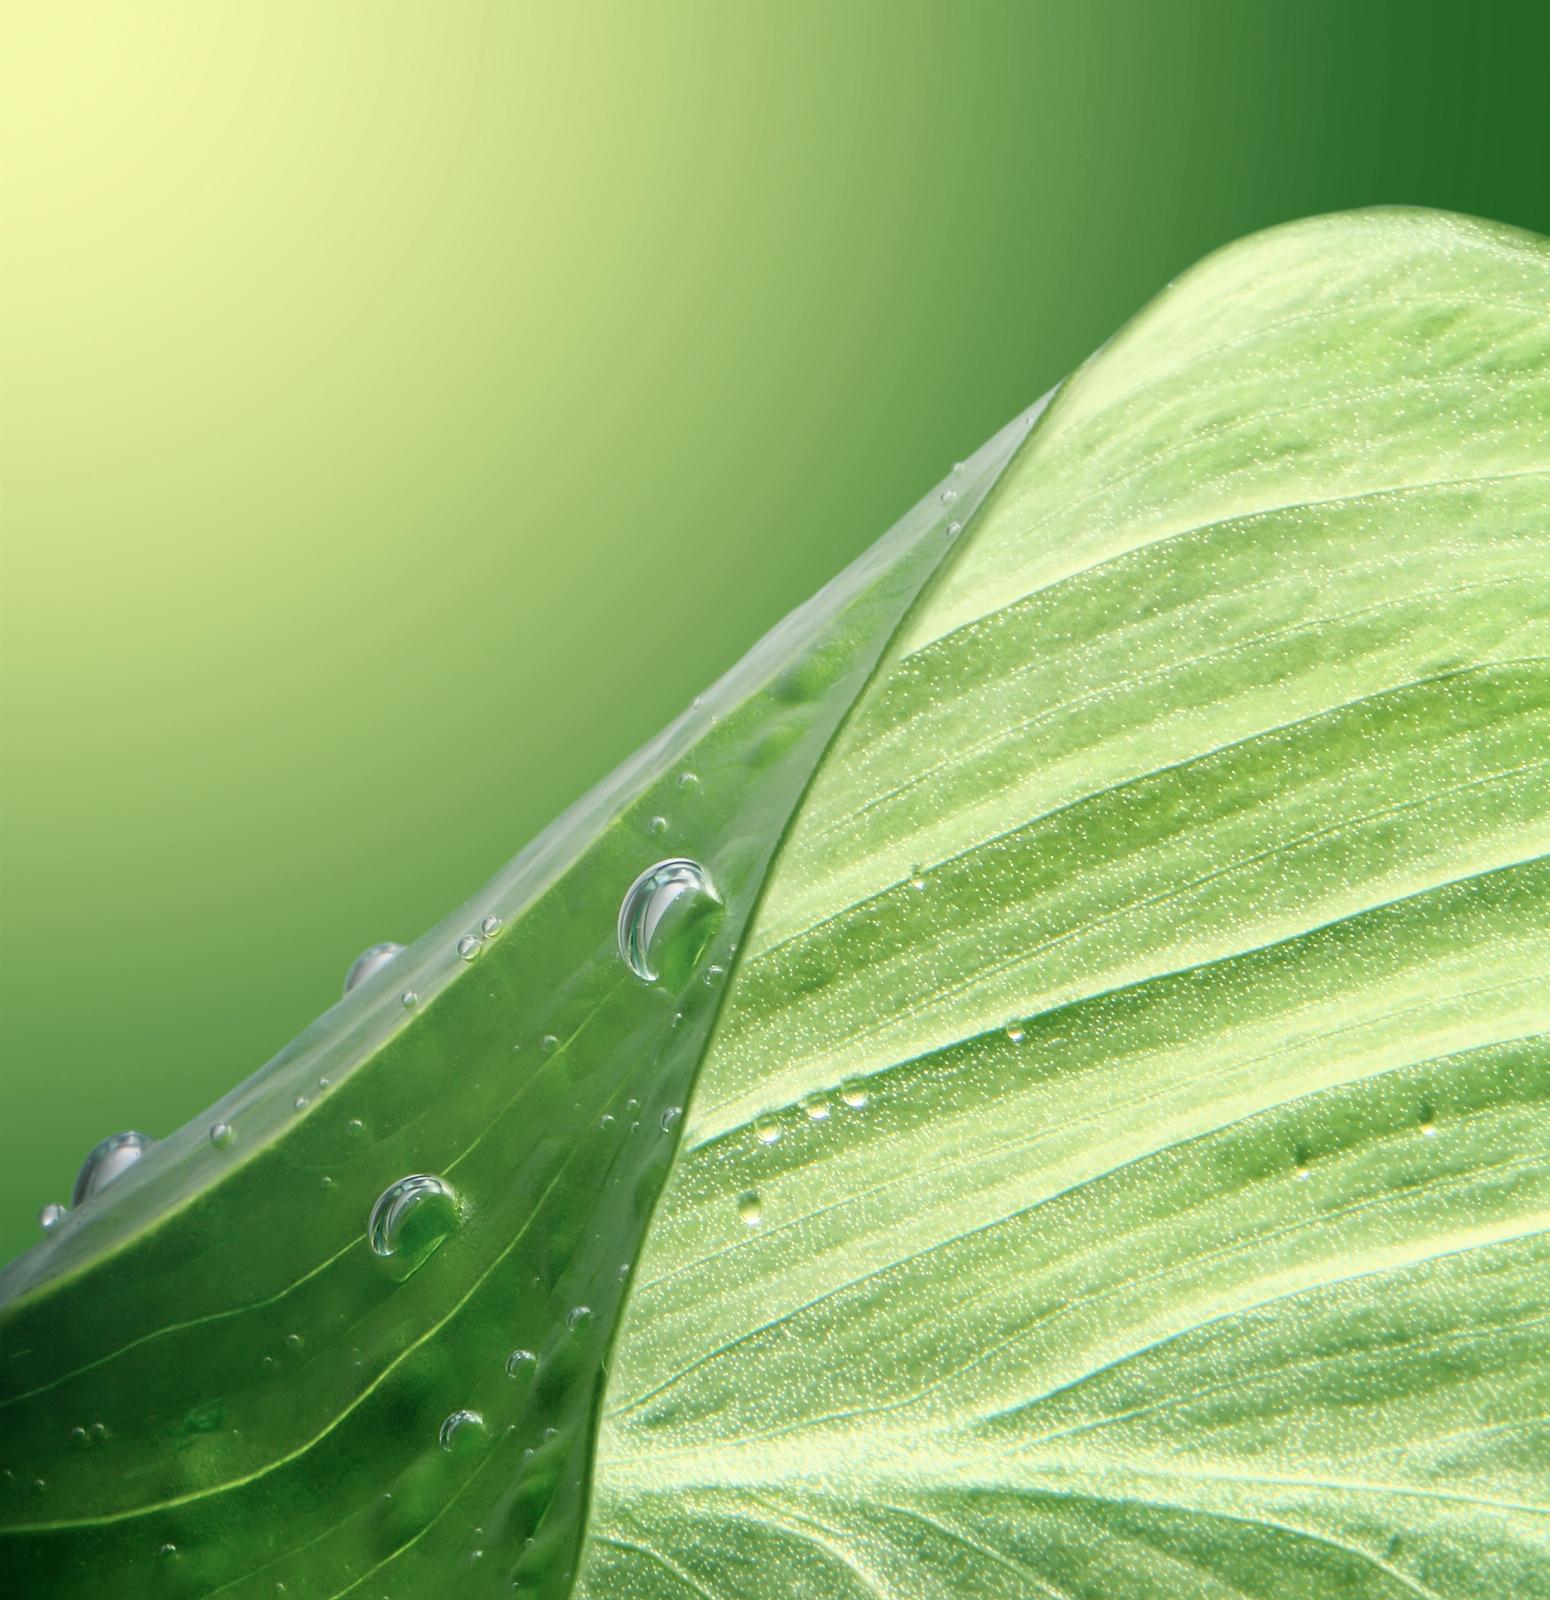 waterdropledt and green leaf